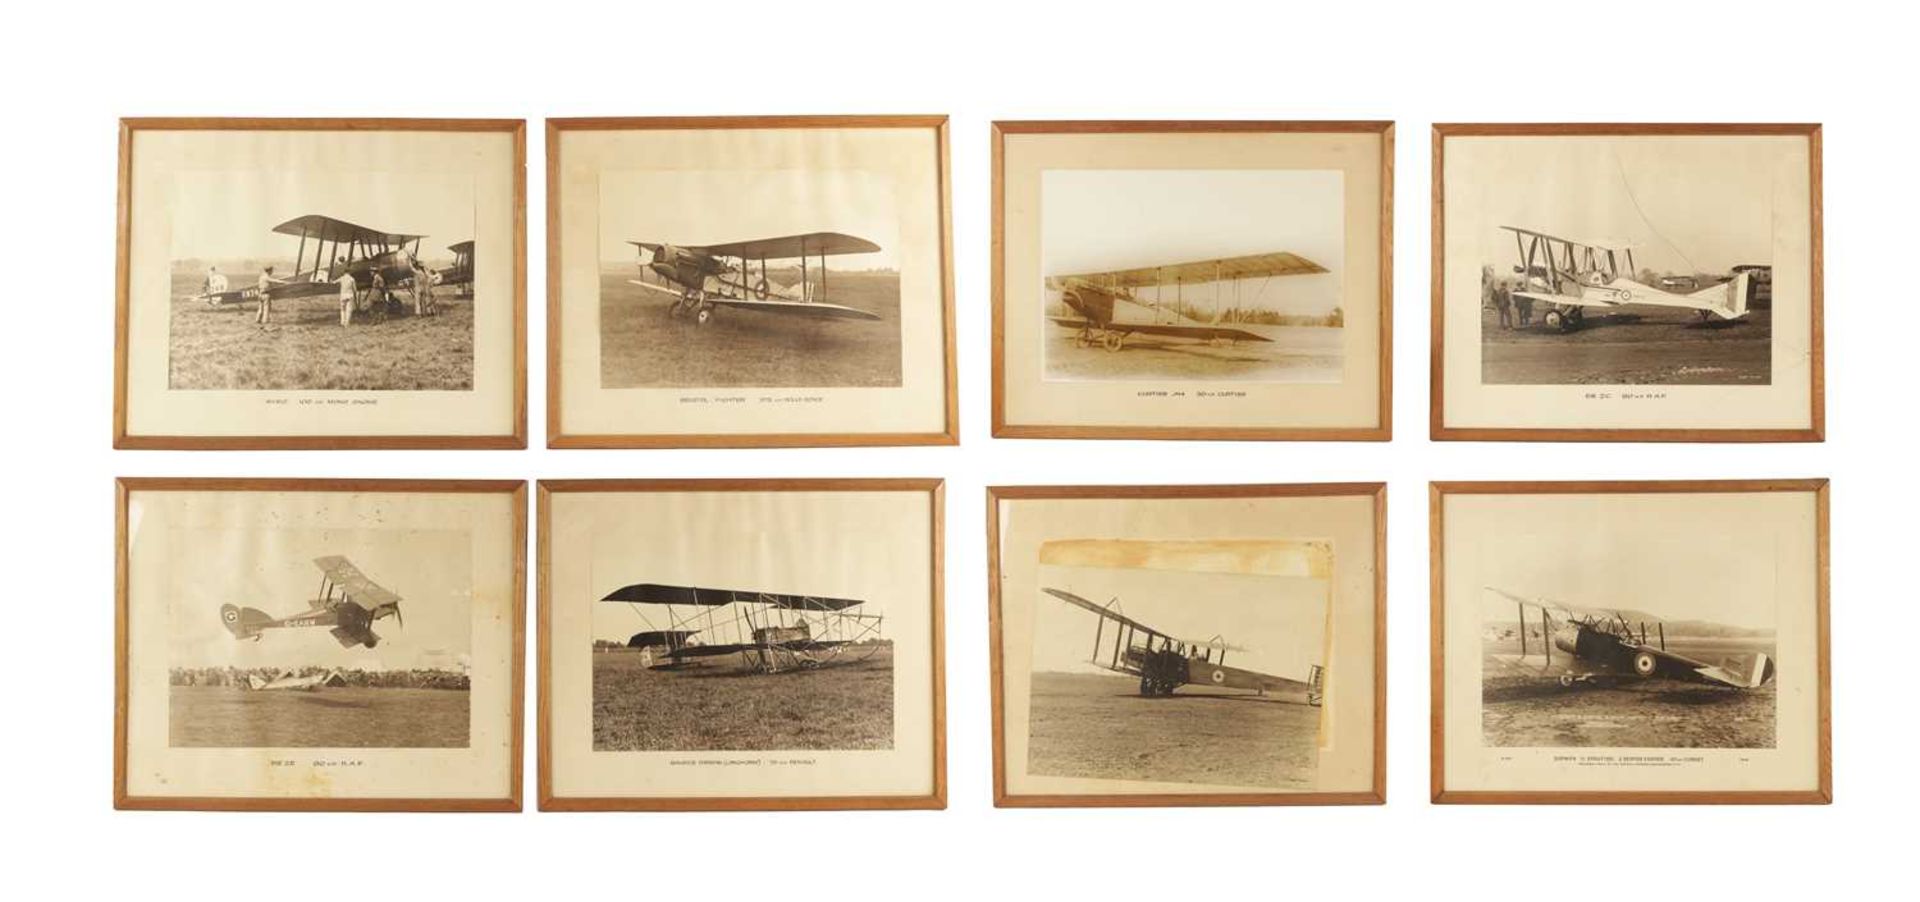 A COLLECTION OF EIGHT FRAMED PHOTOGRAPH PRINTS OF VINTAGE PLANES